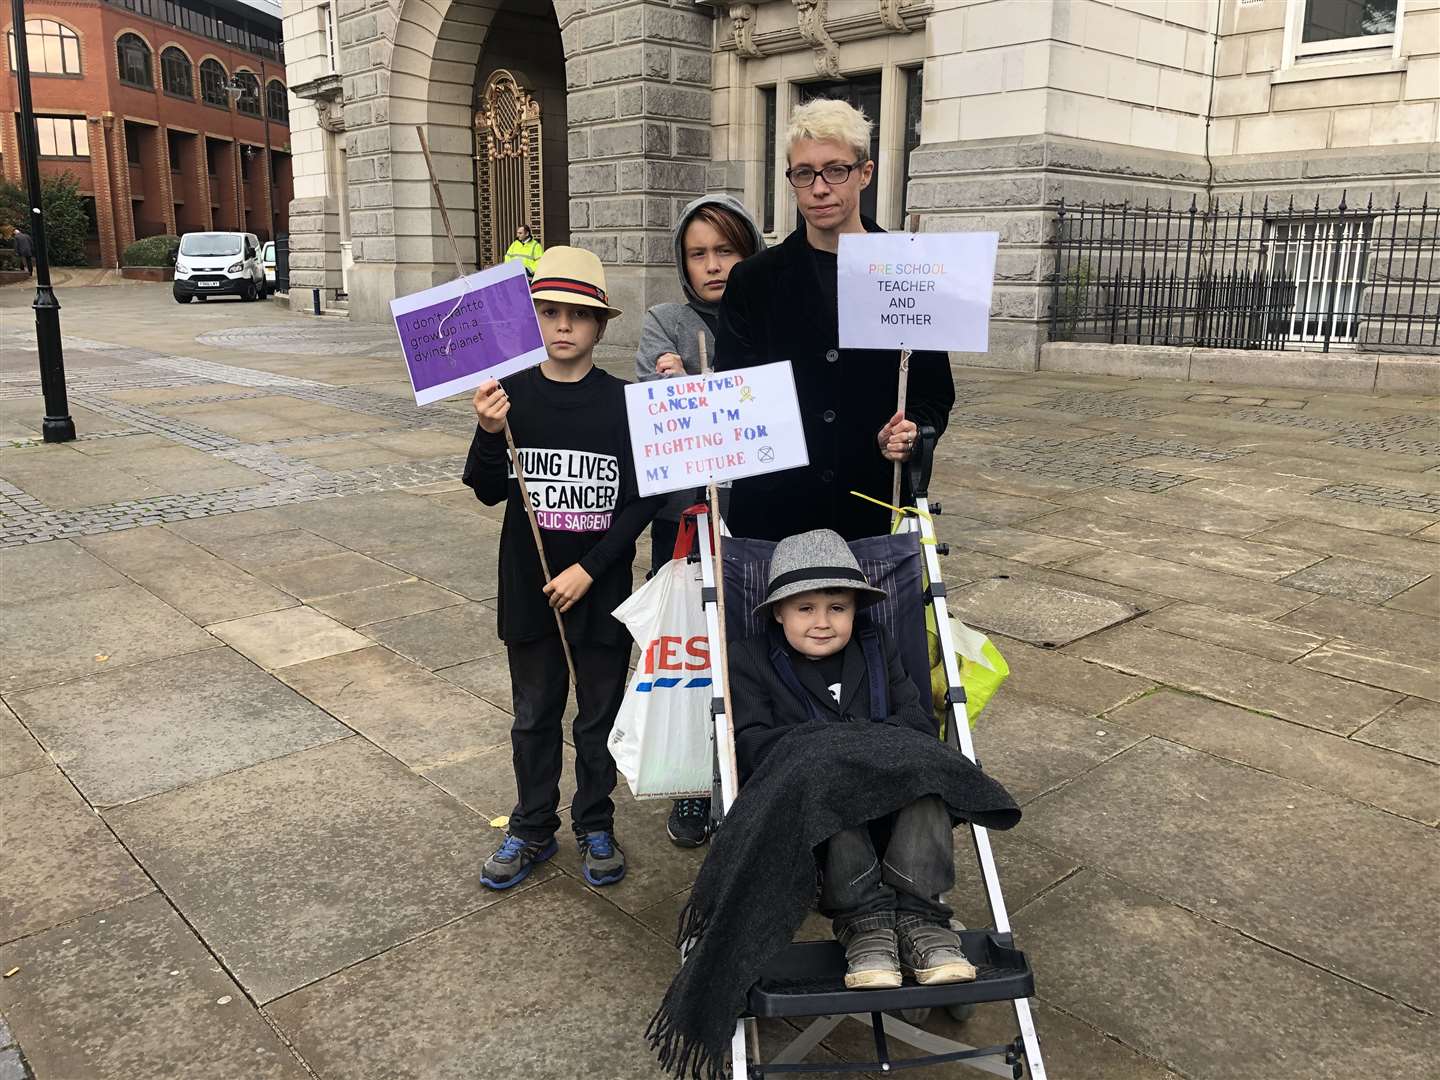 Extinction Rebellion protestors take to the streets in a funeral march. Sam Dickenson, 42, from Maidstone. Pictured with sons. From left to right: Rufus, 9, Arthur, 12 and Seth, 5. (19542208)